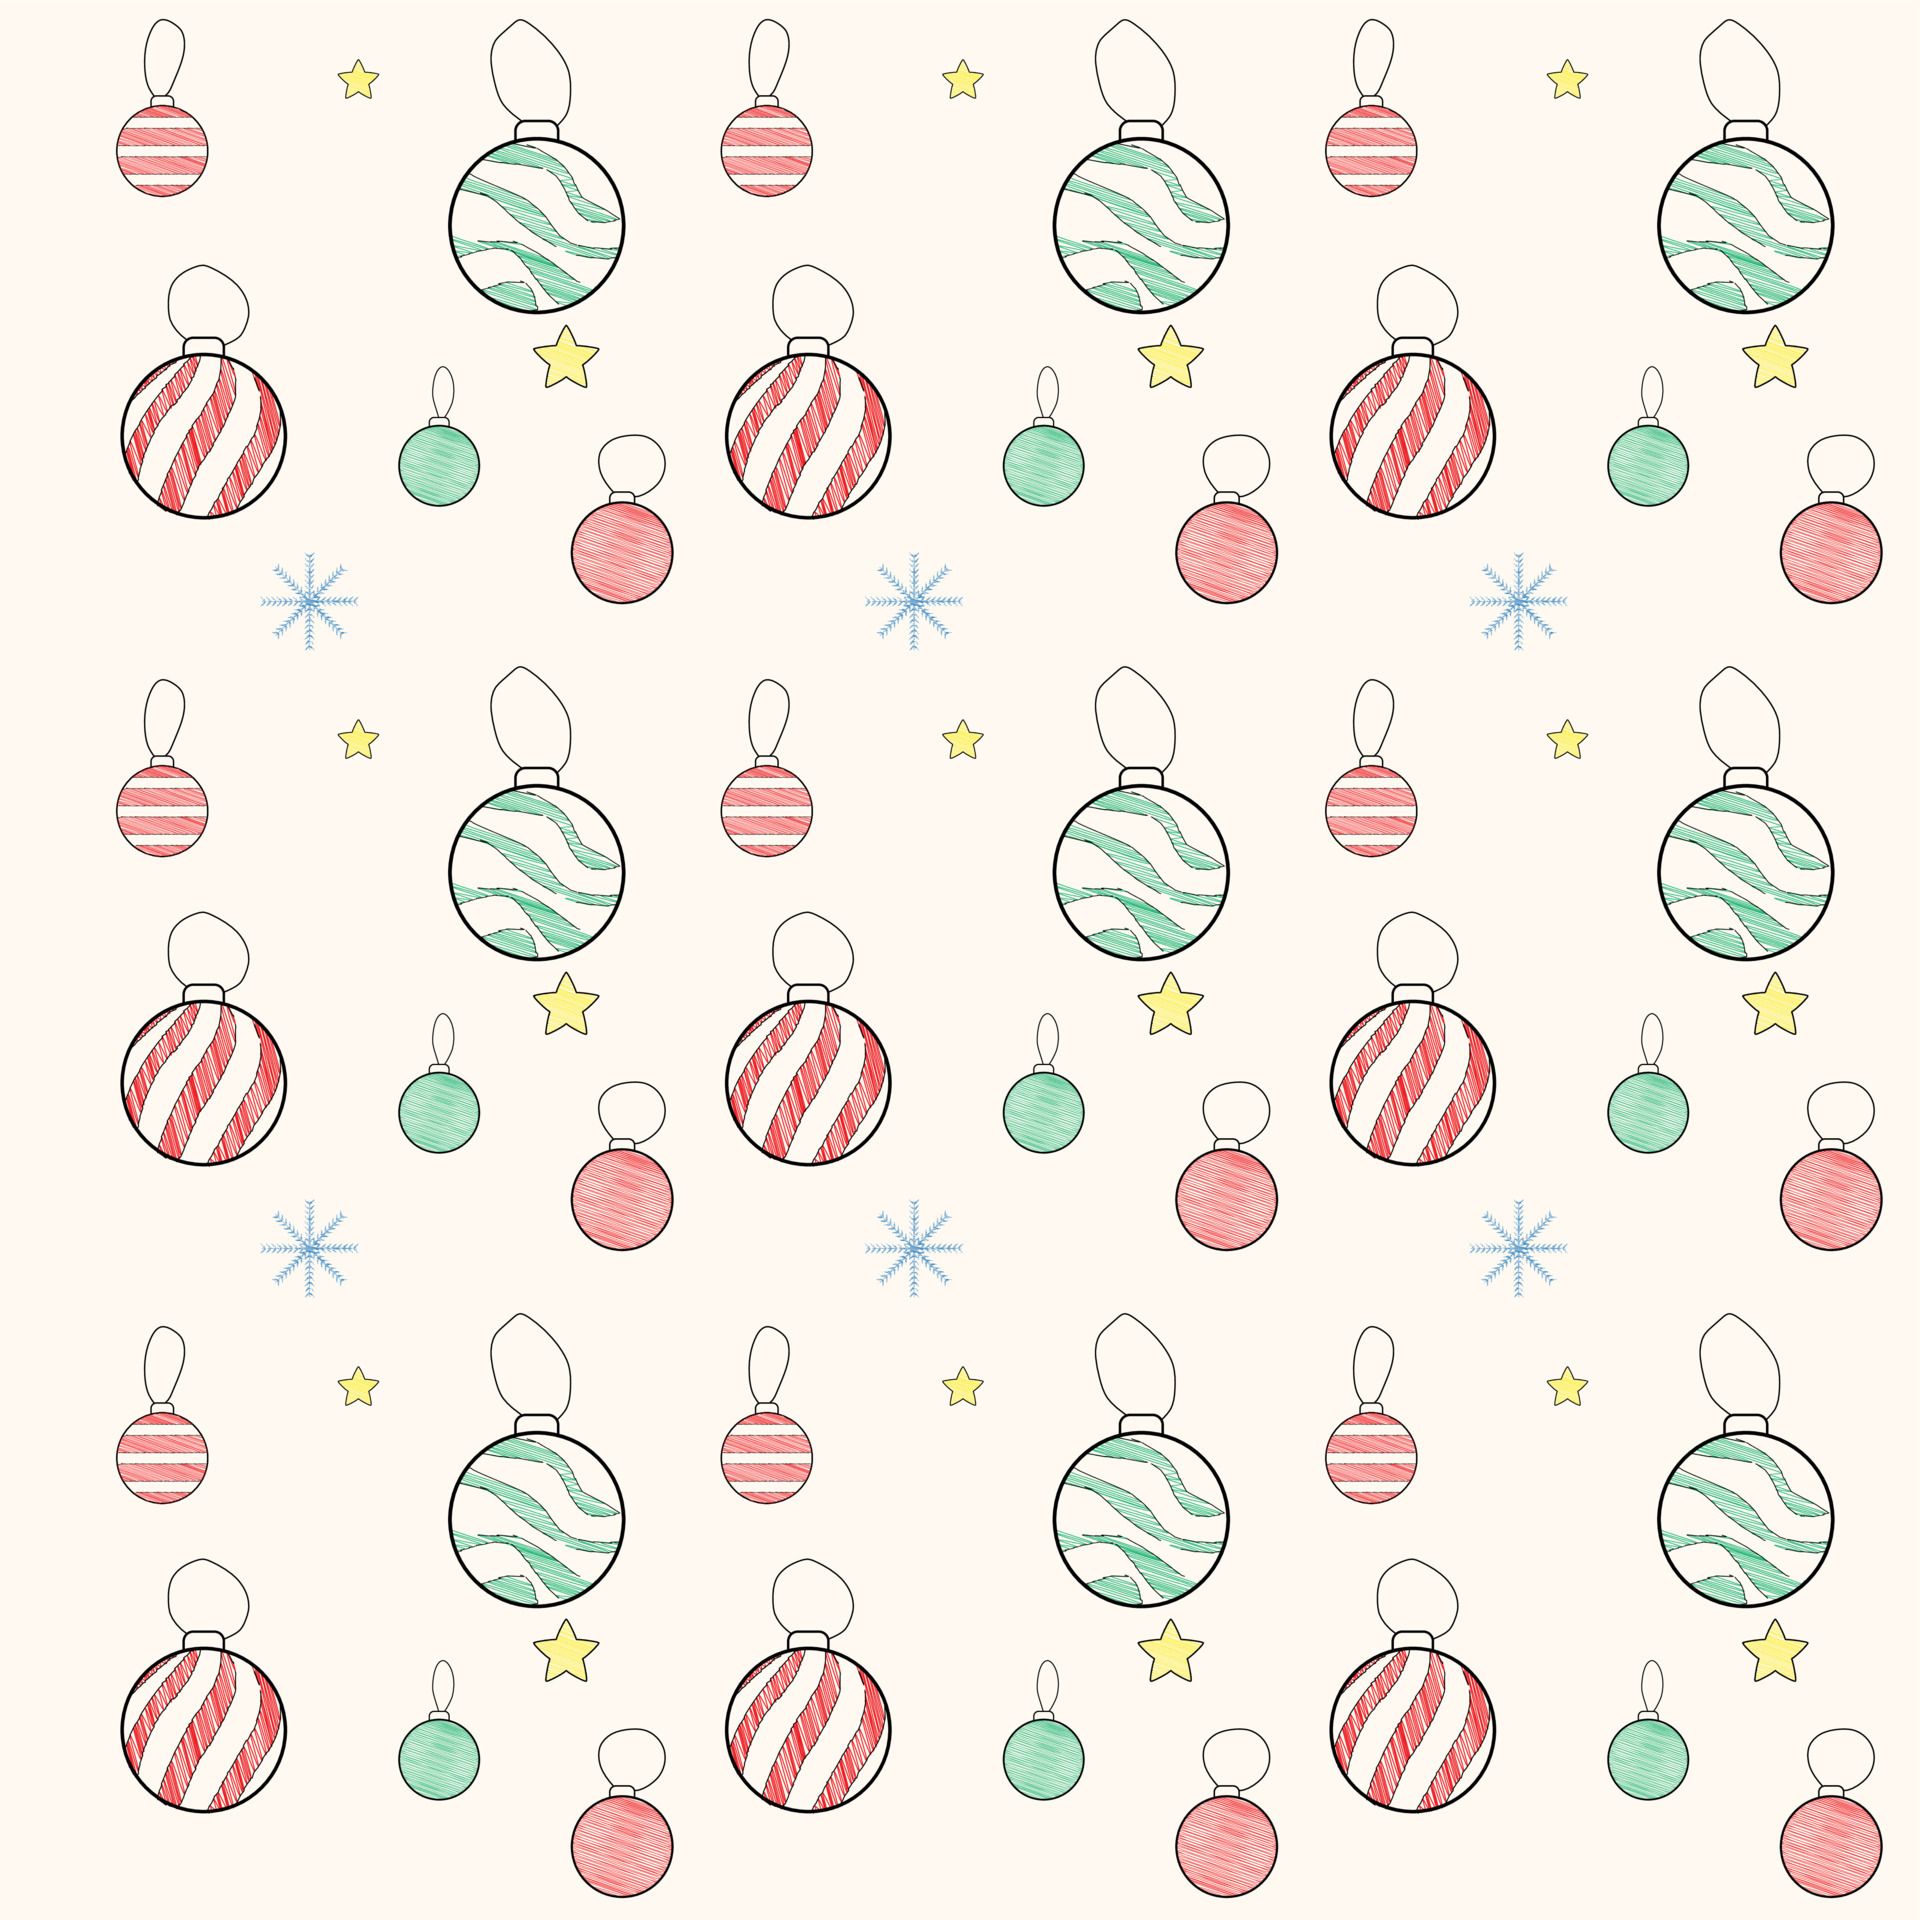 A pattern of christmas balls and stars - Doodles, cute Christmas